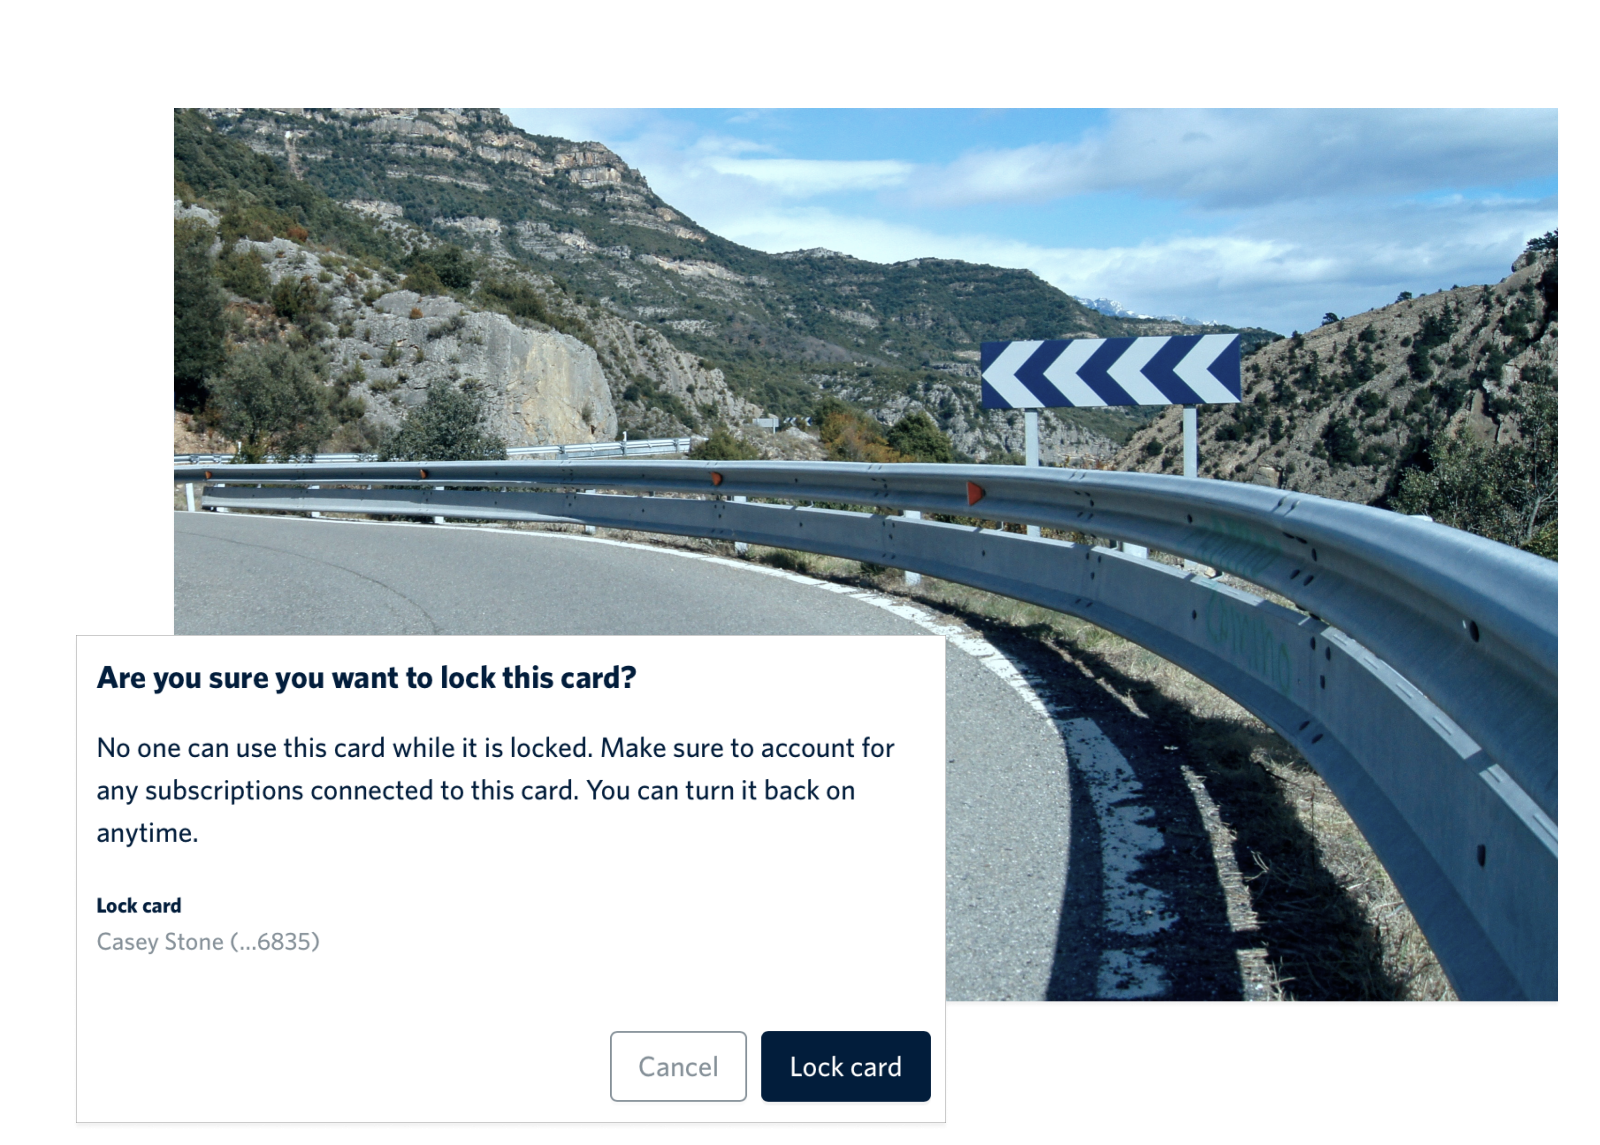 Image of a highway guardrail and a Center Screenshot